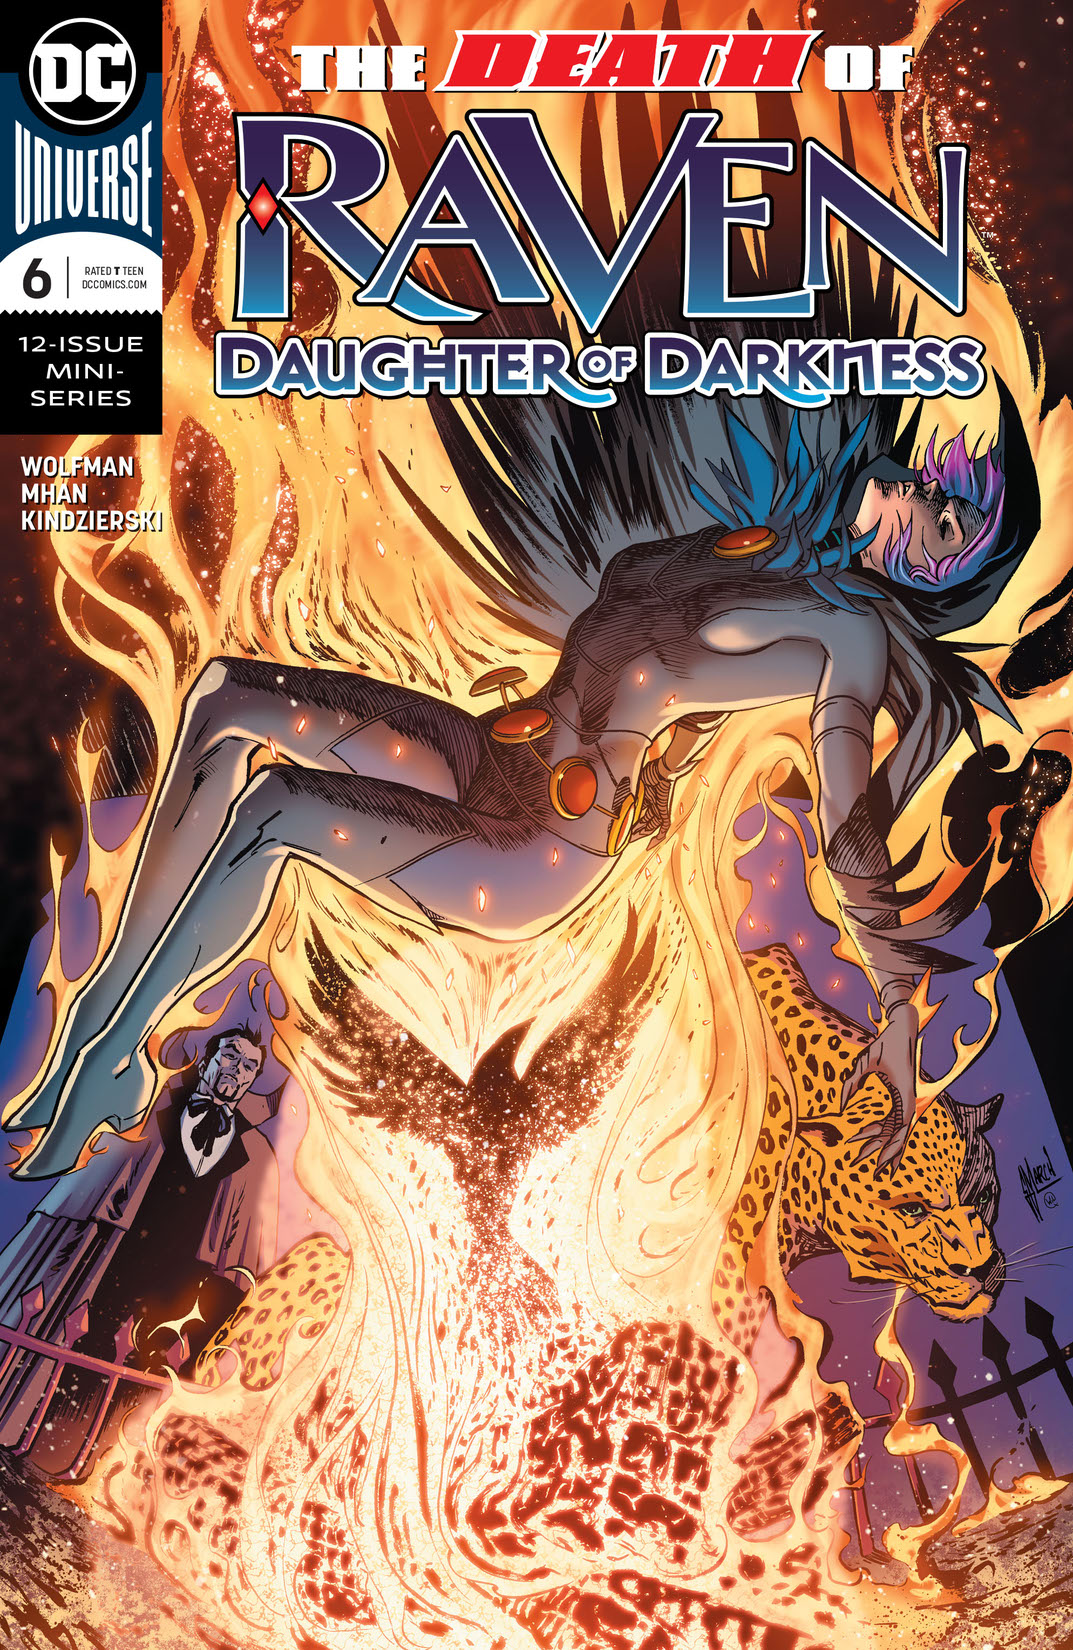 Raven: Daughter of Darkness #6 preview images